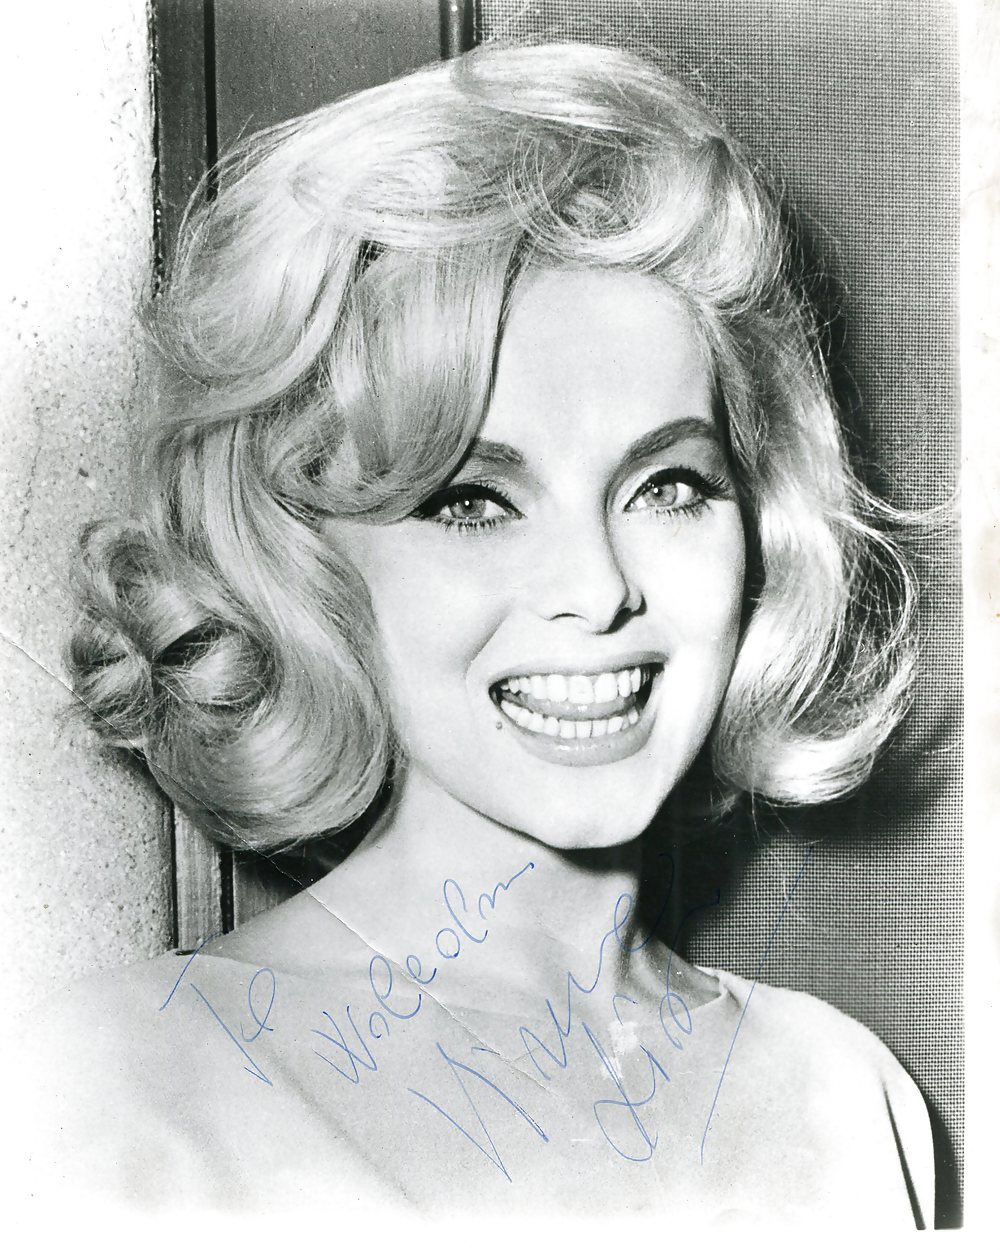 Sexy and Hot VIRNA LISI Celebrity with all natural beauty #18573692